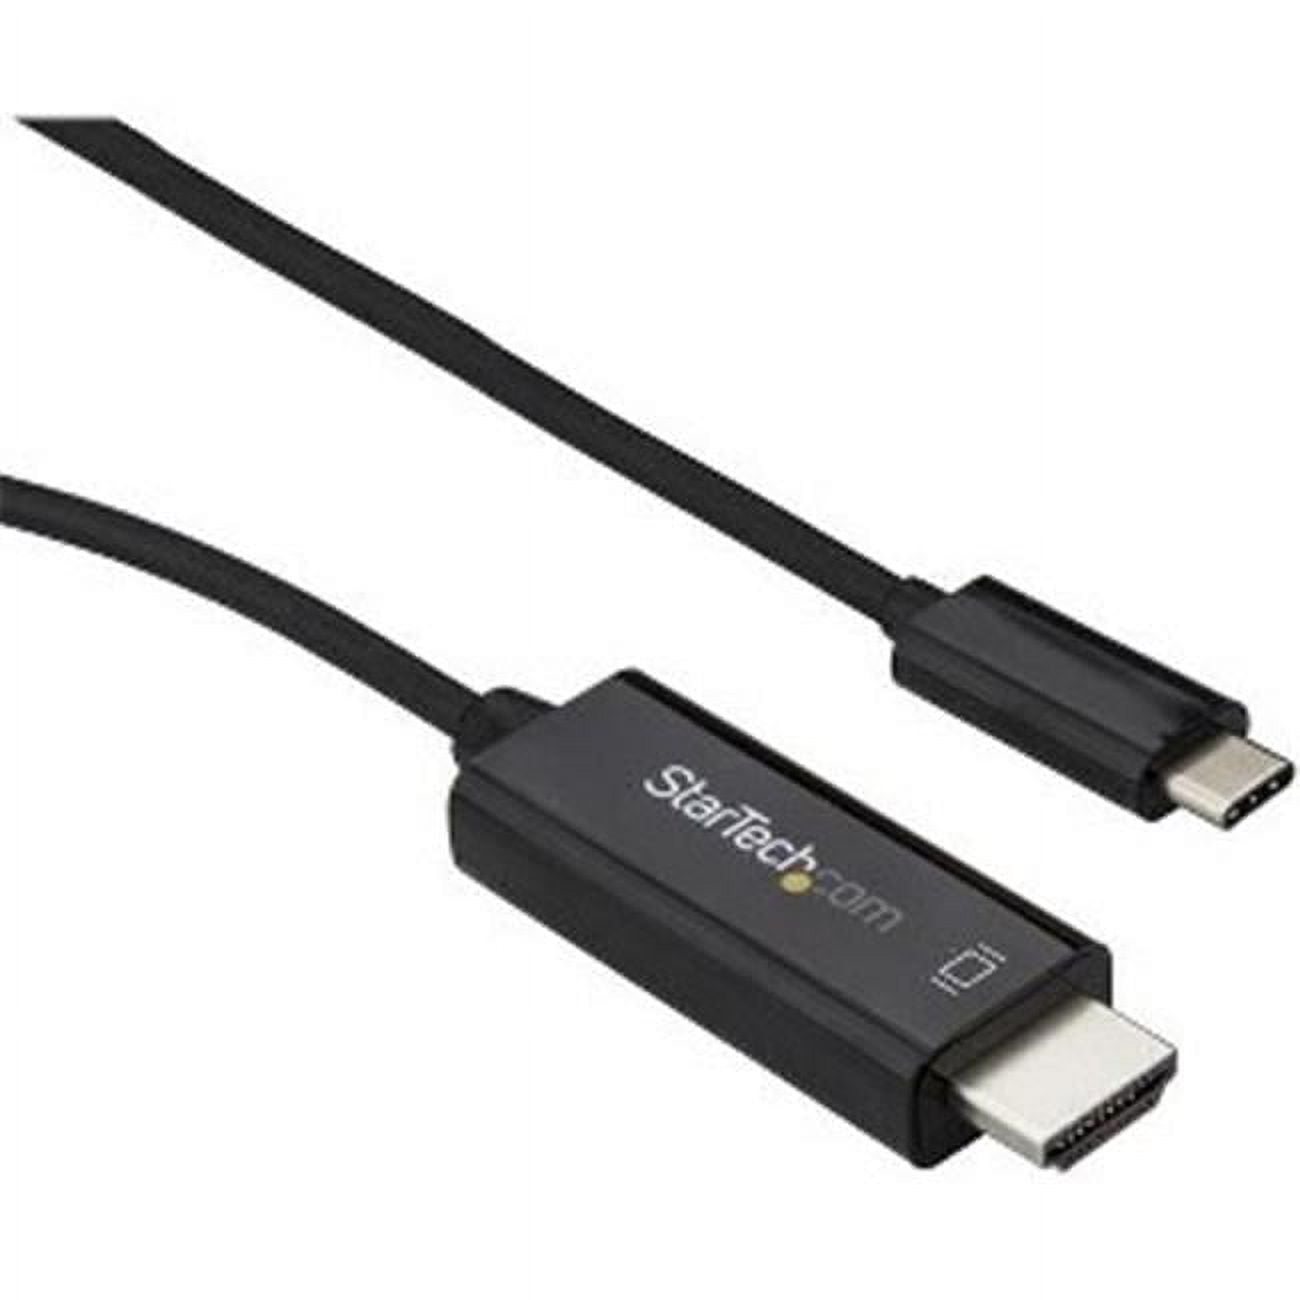 HDMI Converter cable - CAC-CHDMI10BK for USB Type-C